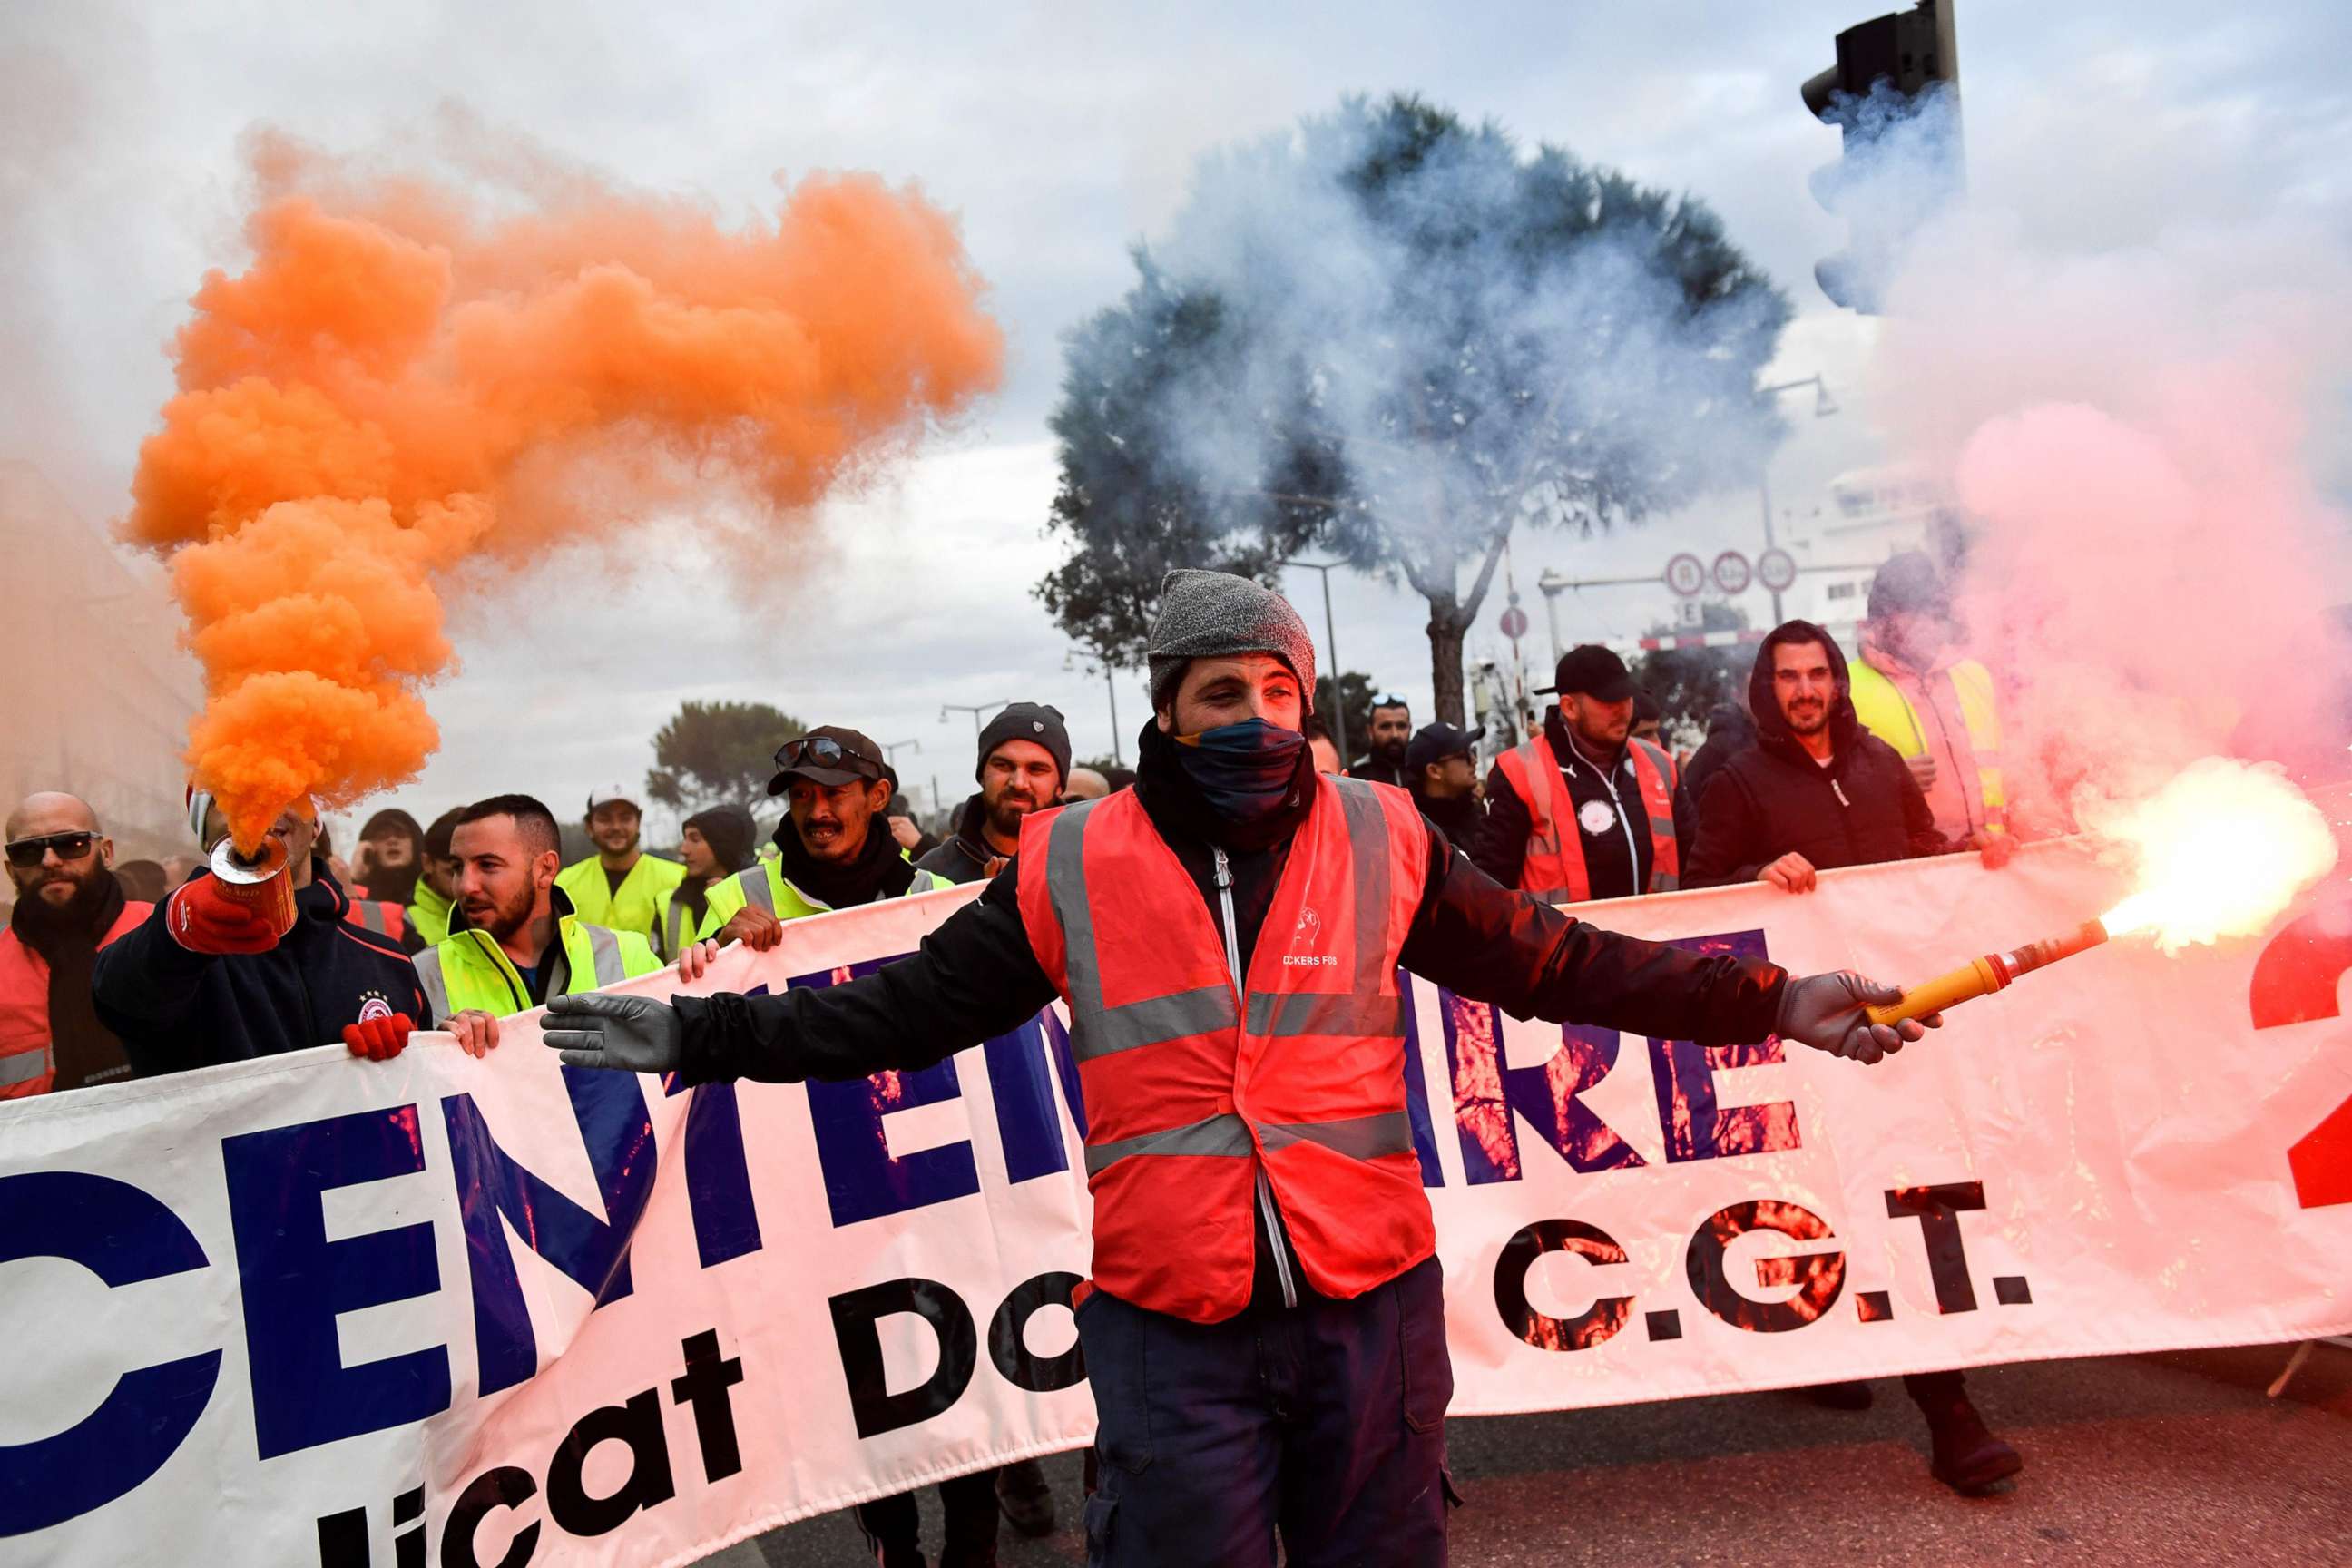 PHOTO: People march as they take part in a demonstration to protest against the pension overhauls, in Marseille, France, Dec. 5, 2019.